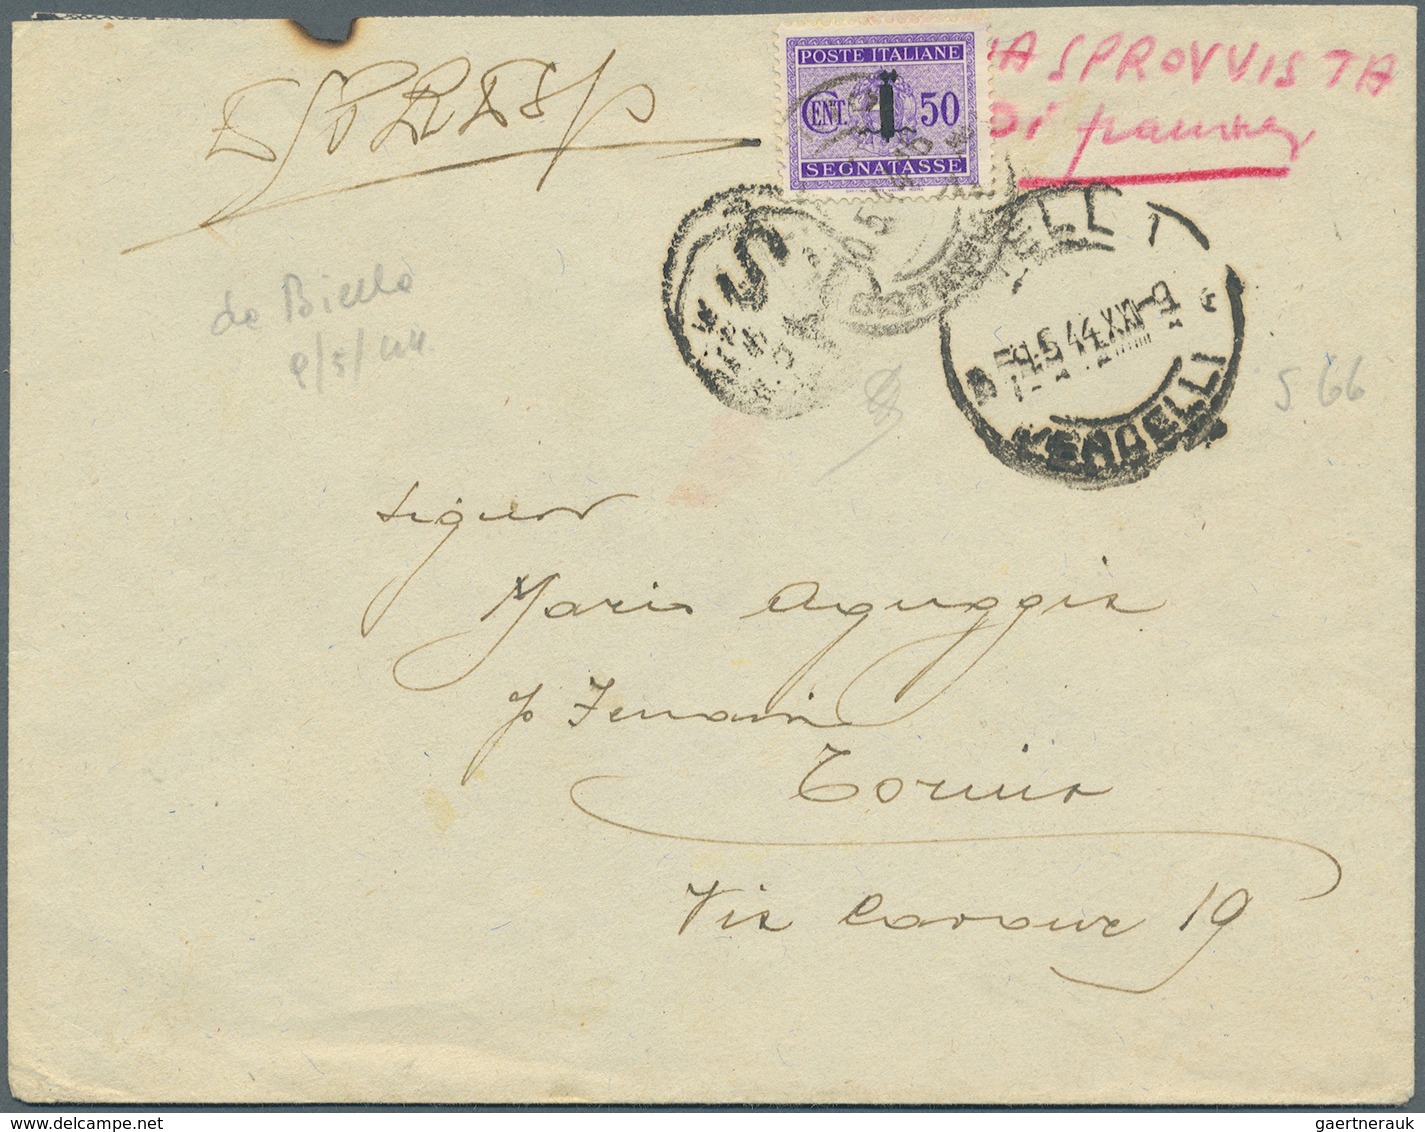 Br/Brfst Italien - Portomarken: 1883/1970 (ca) 80+ covers with porto stamps - a huge part of them "used as re